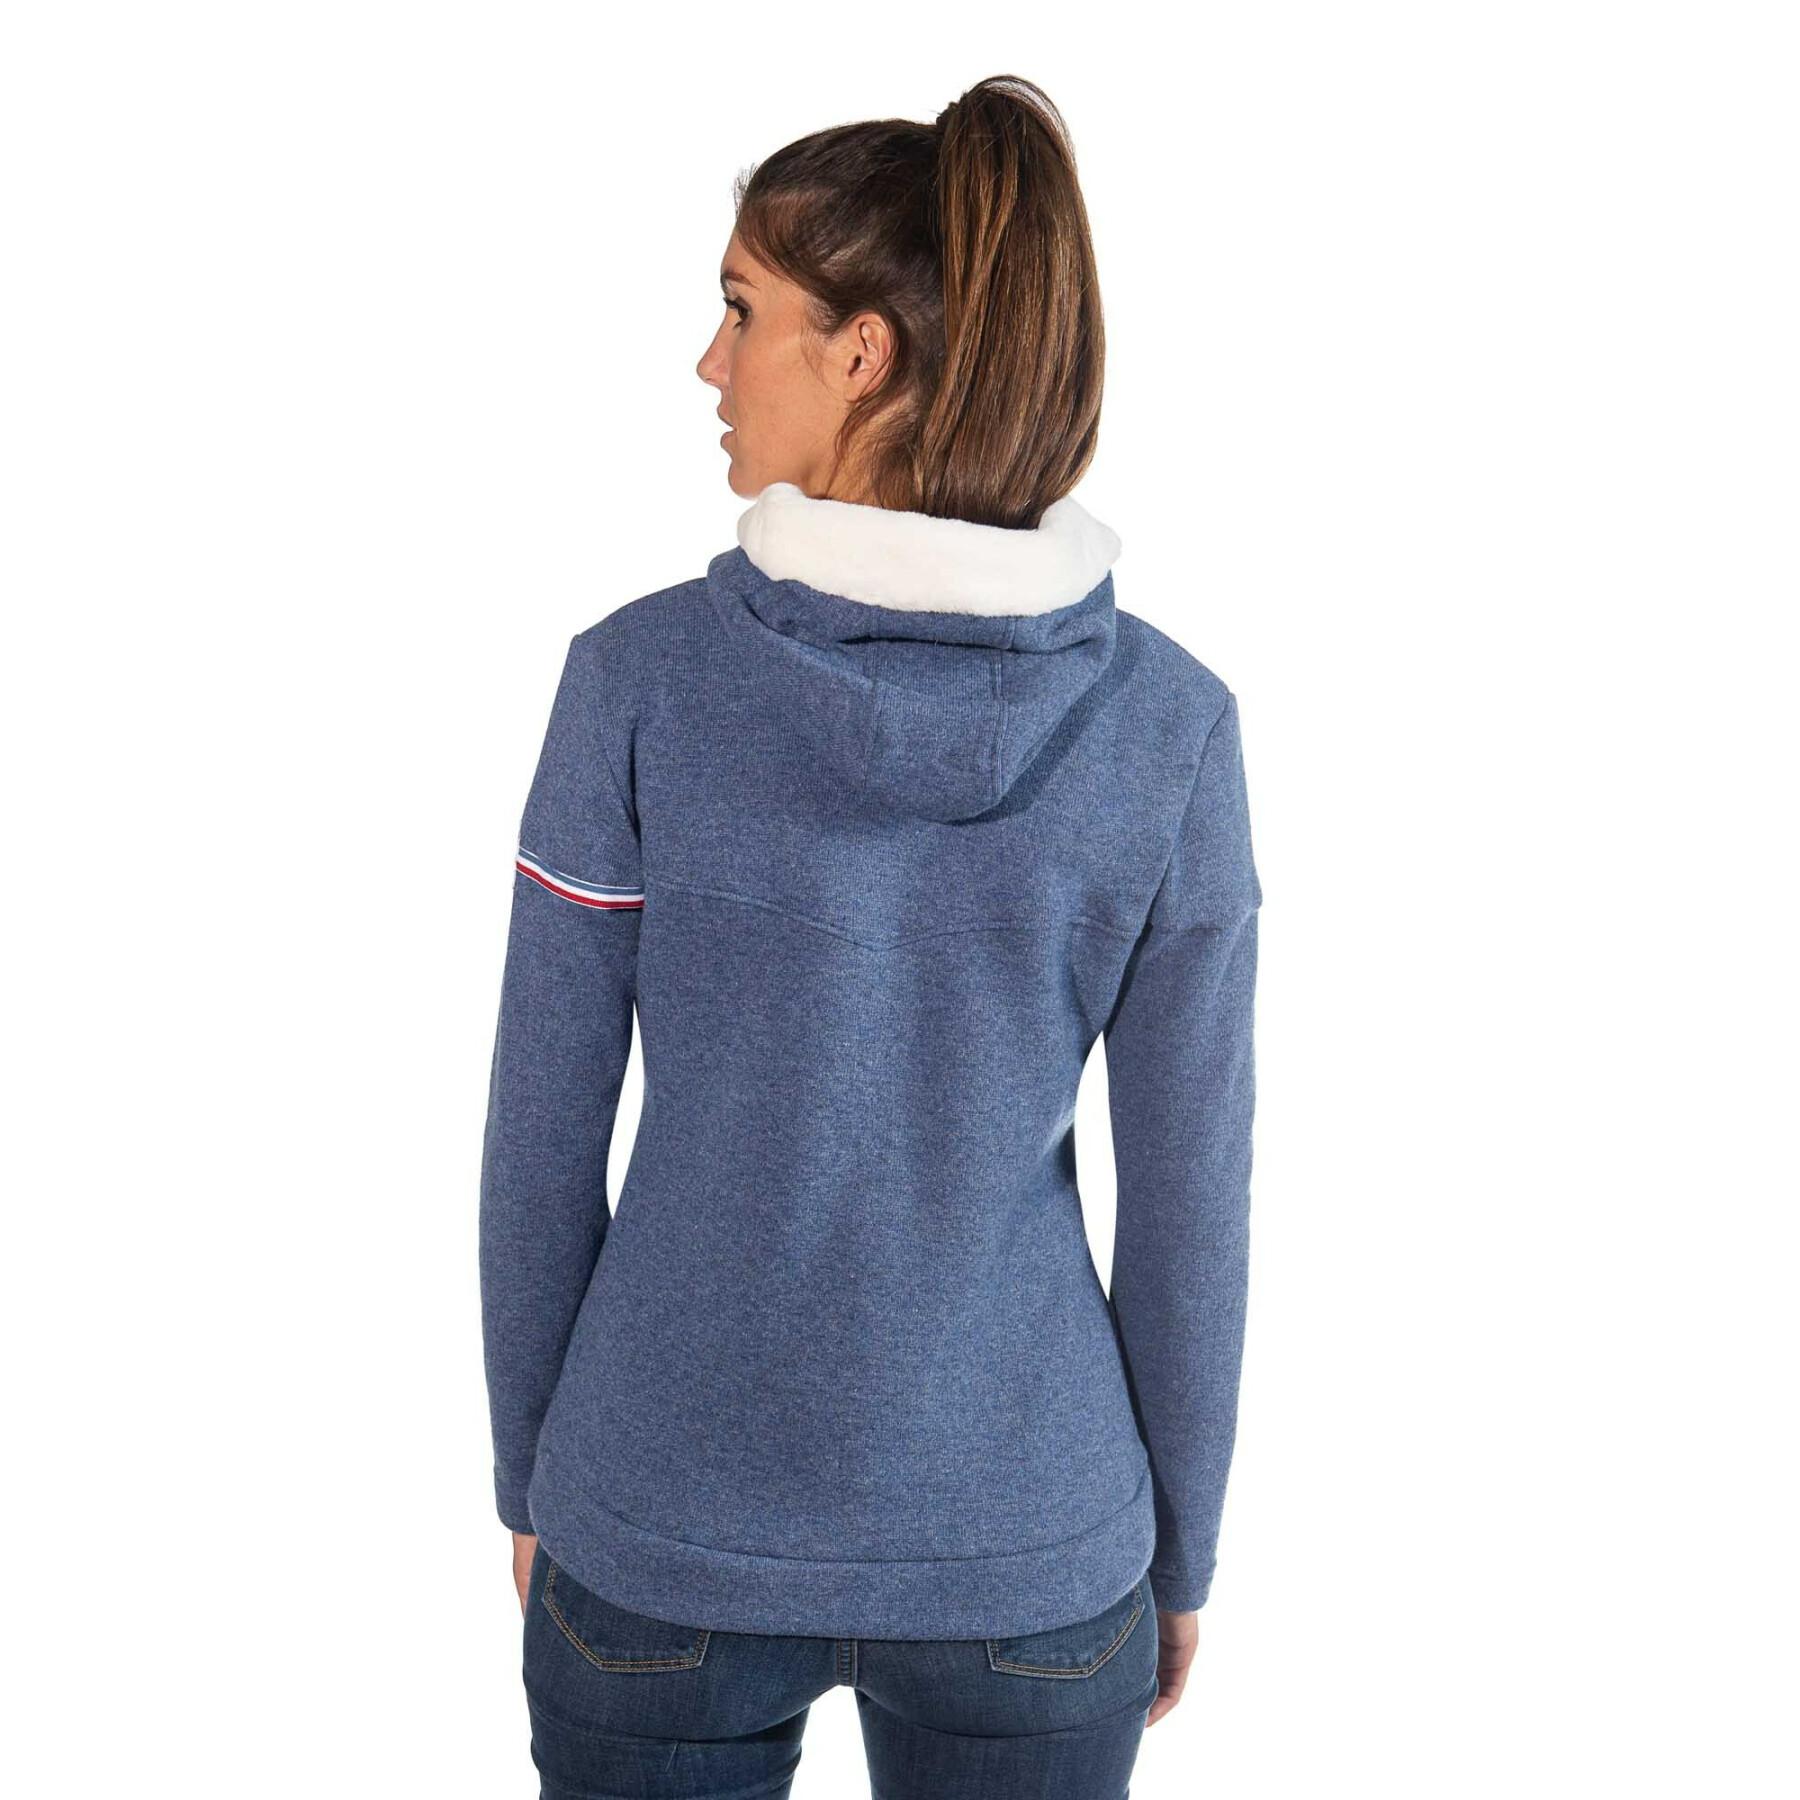 Jersey de mujer Skidress Claire